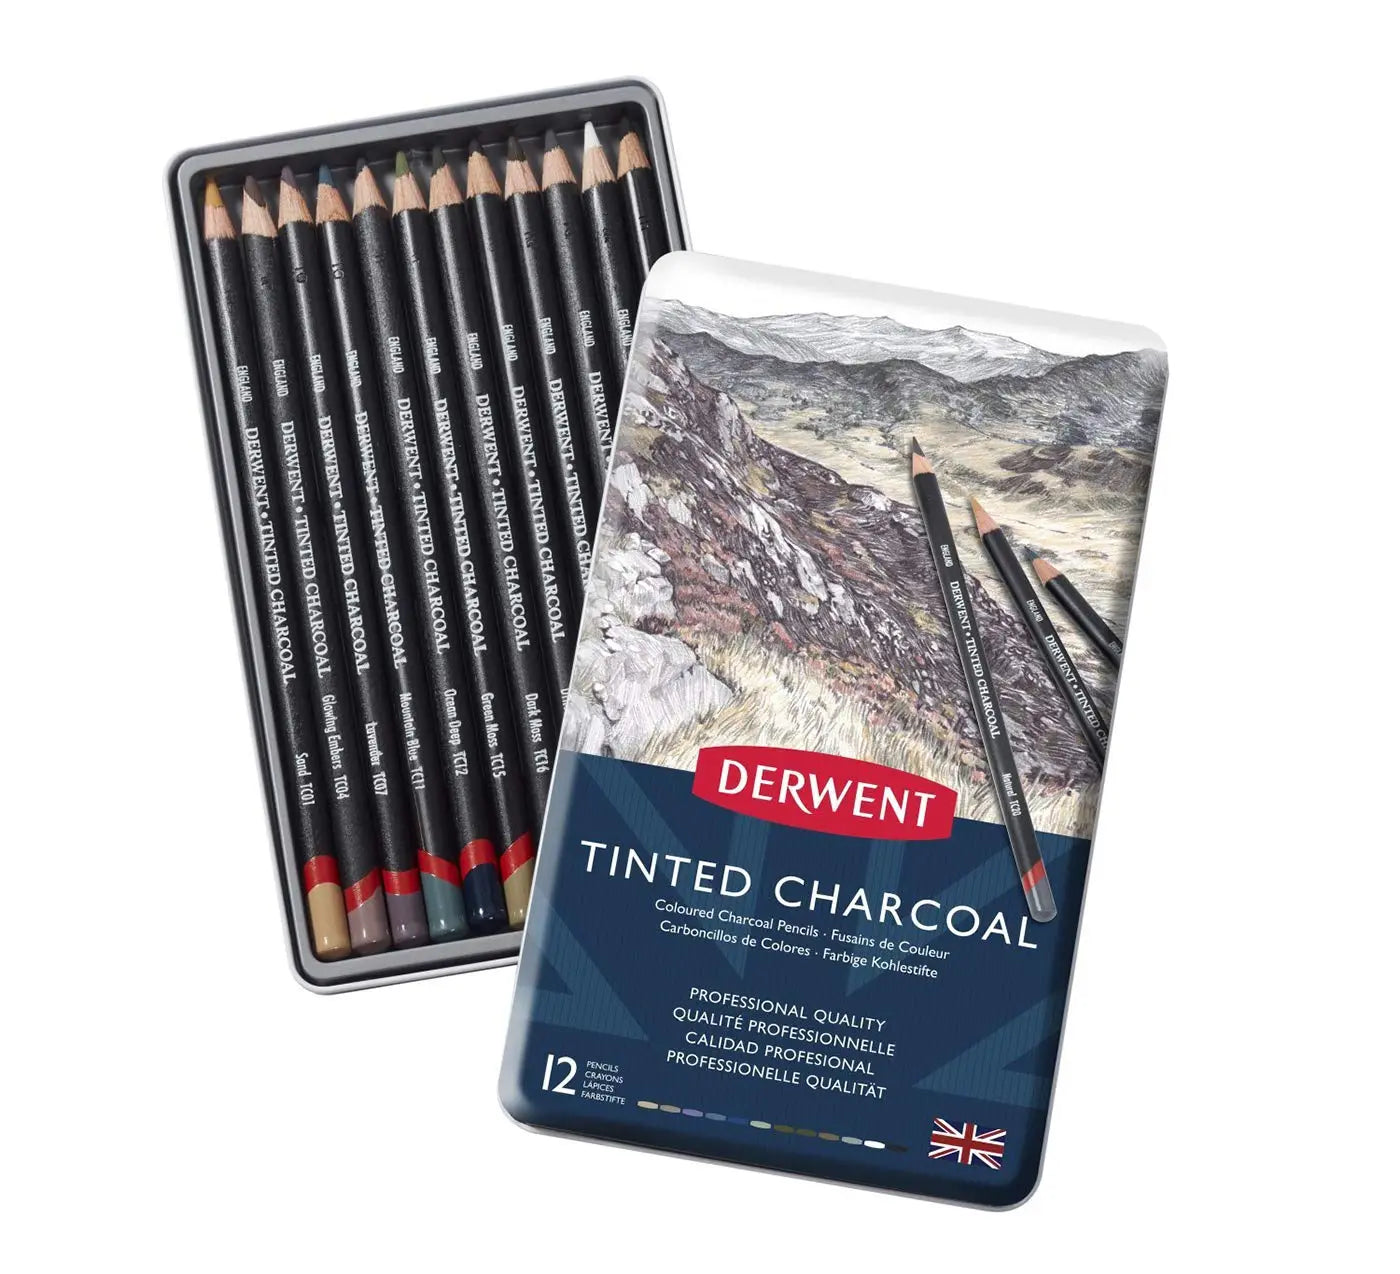 Derwent Tinted Charcoal Drawing Pencils Blister Watersoluble Pencils Set of 12 ( 2301690 ) Derwent